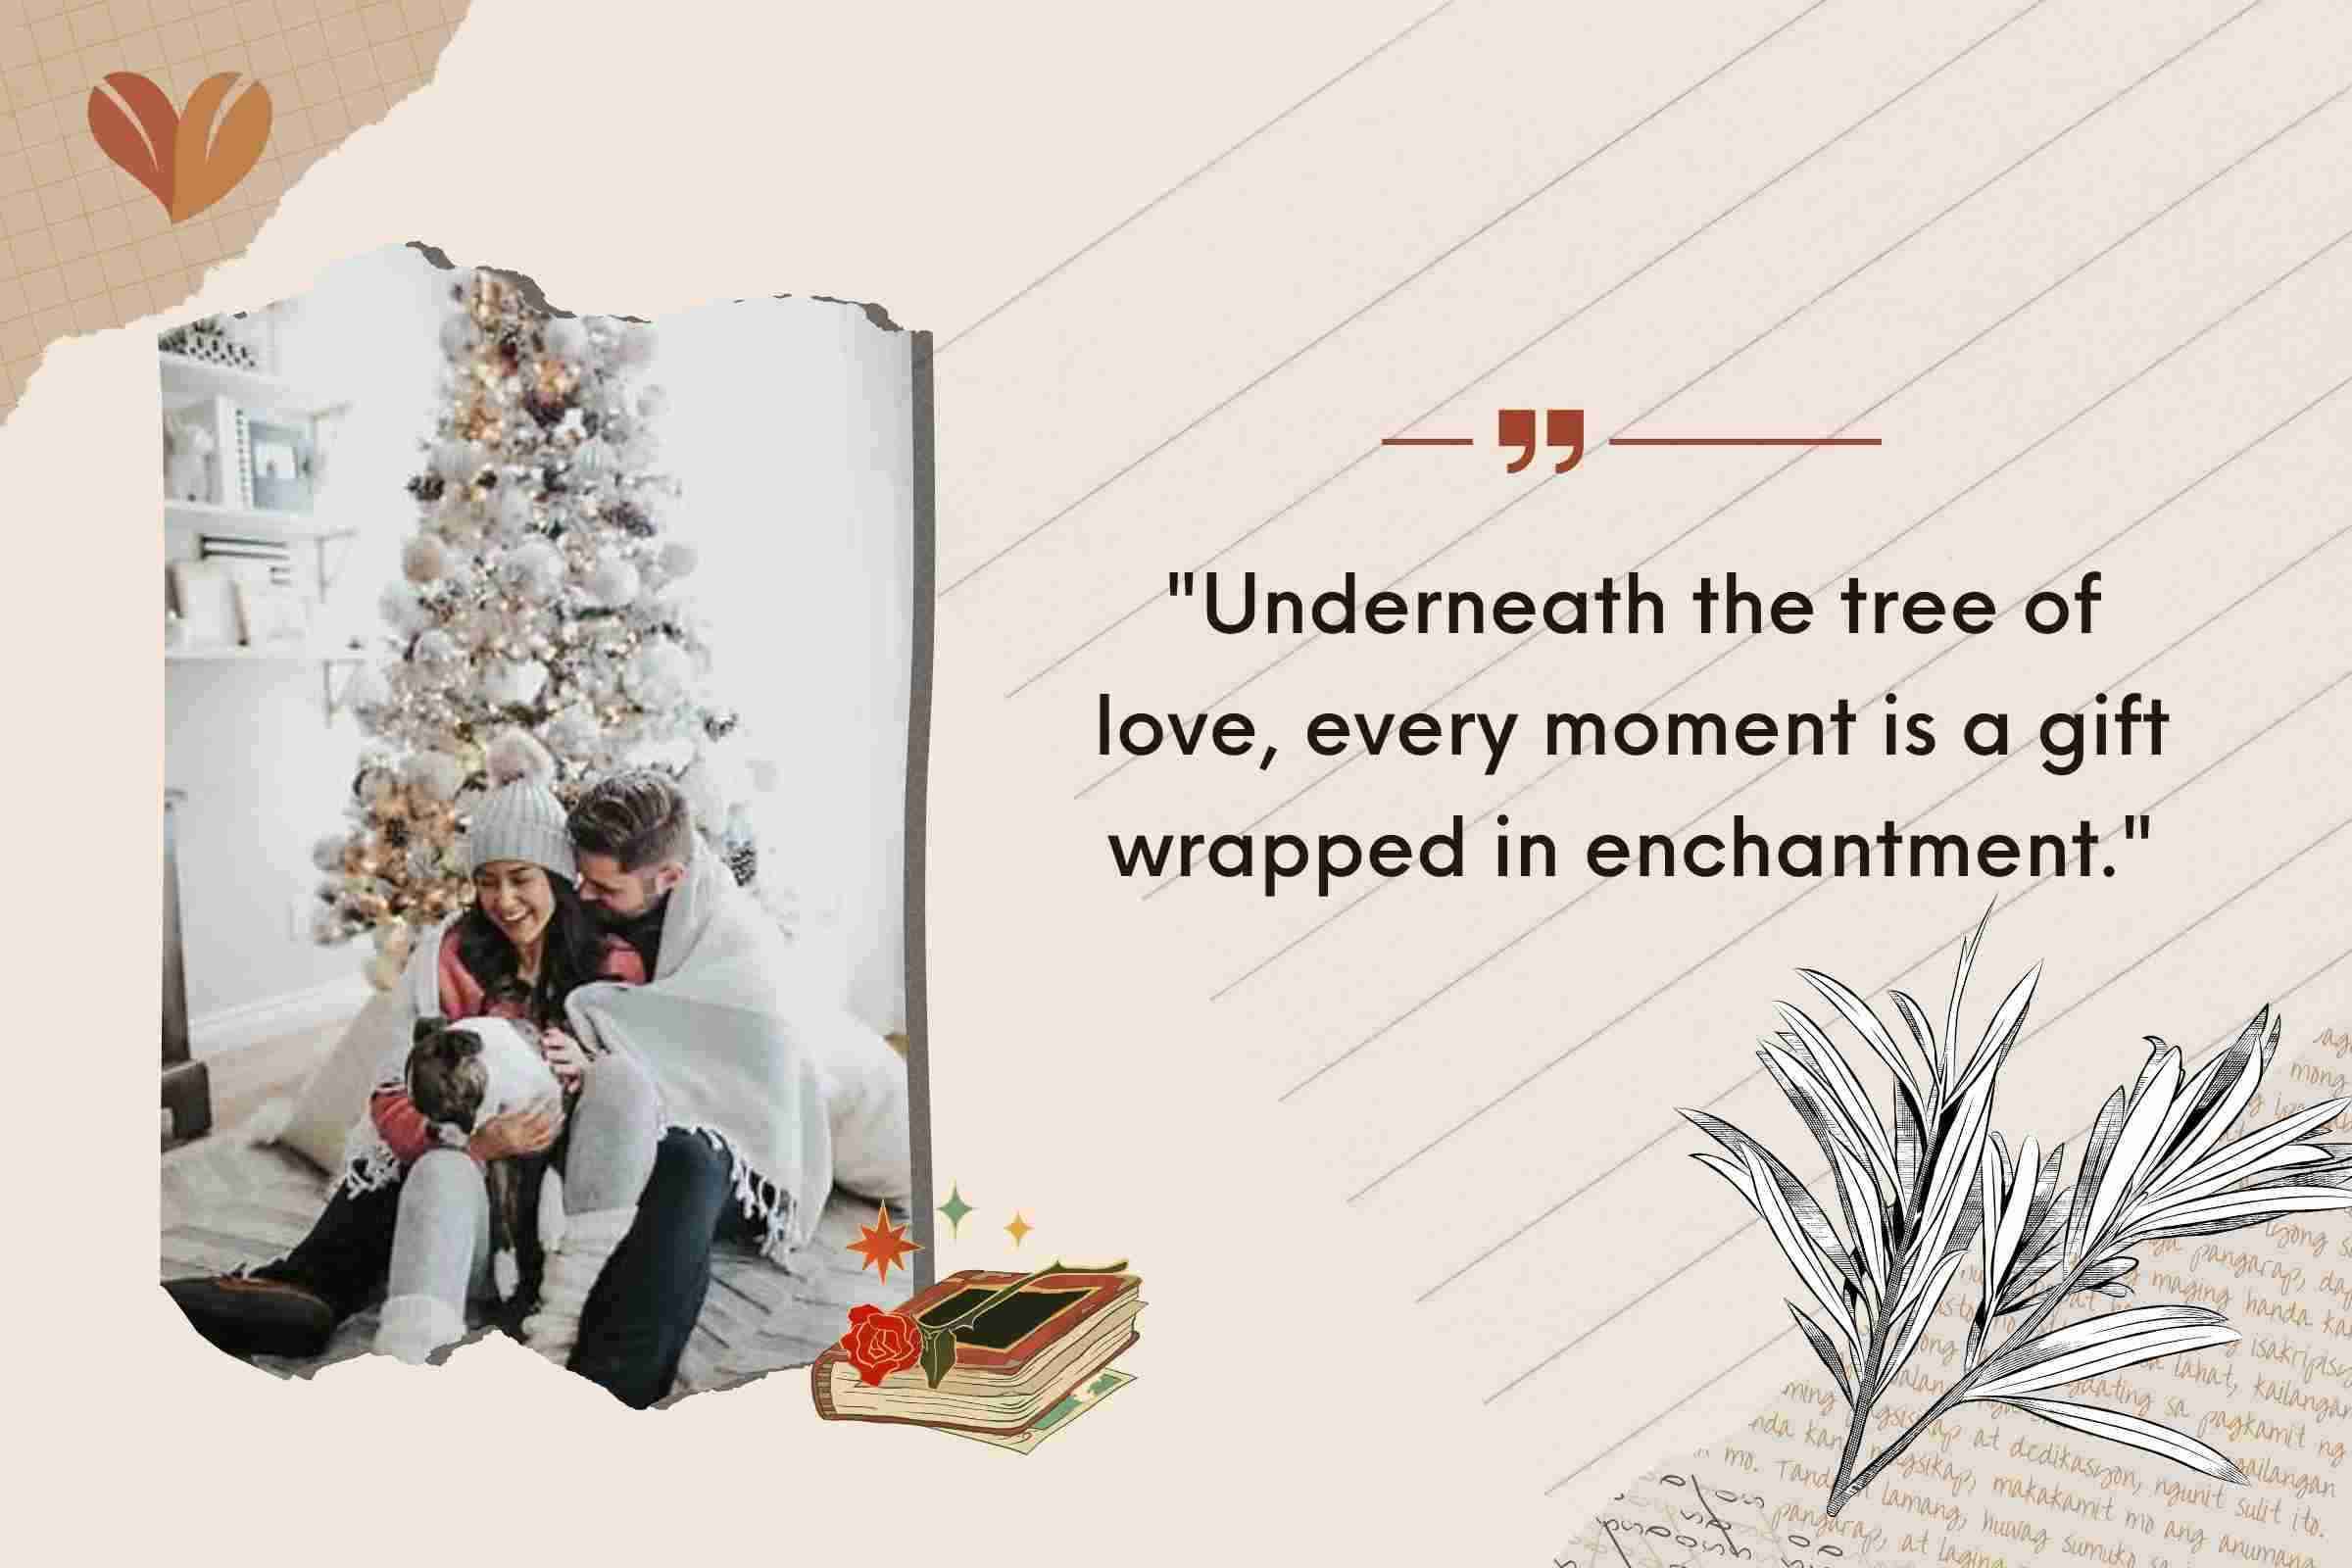 Christmas quotes for Fiance: "Underneath the tree of love, every moment is a gift wrapped in enchantment."